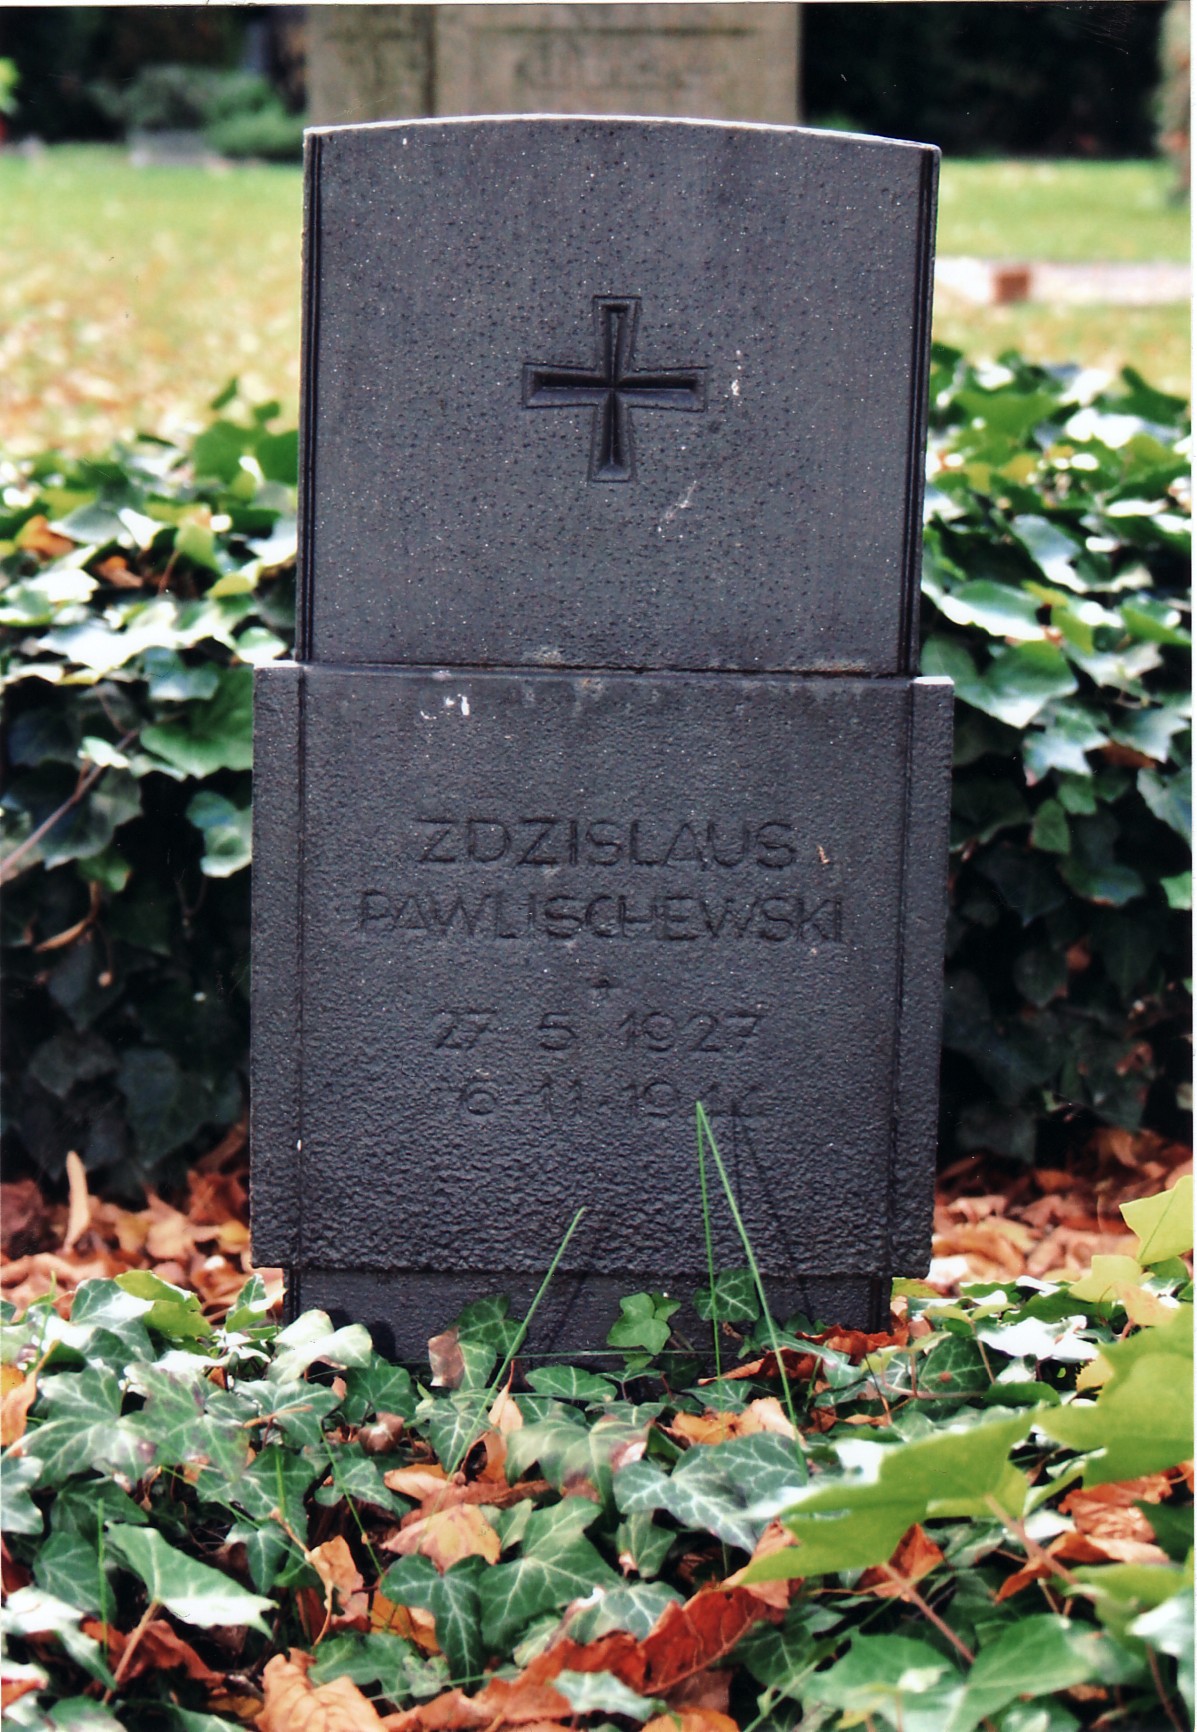 Tombstone of a Polish forced labourer at the cemetery in Salzgitter-Thiede